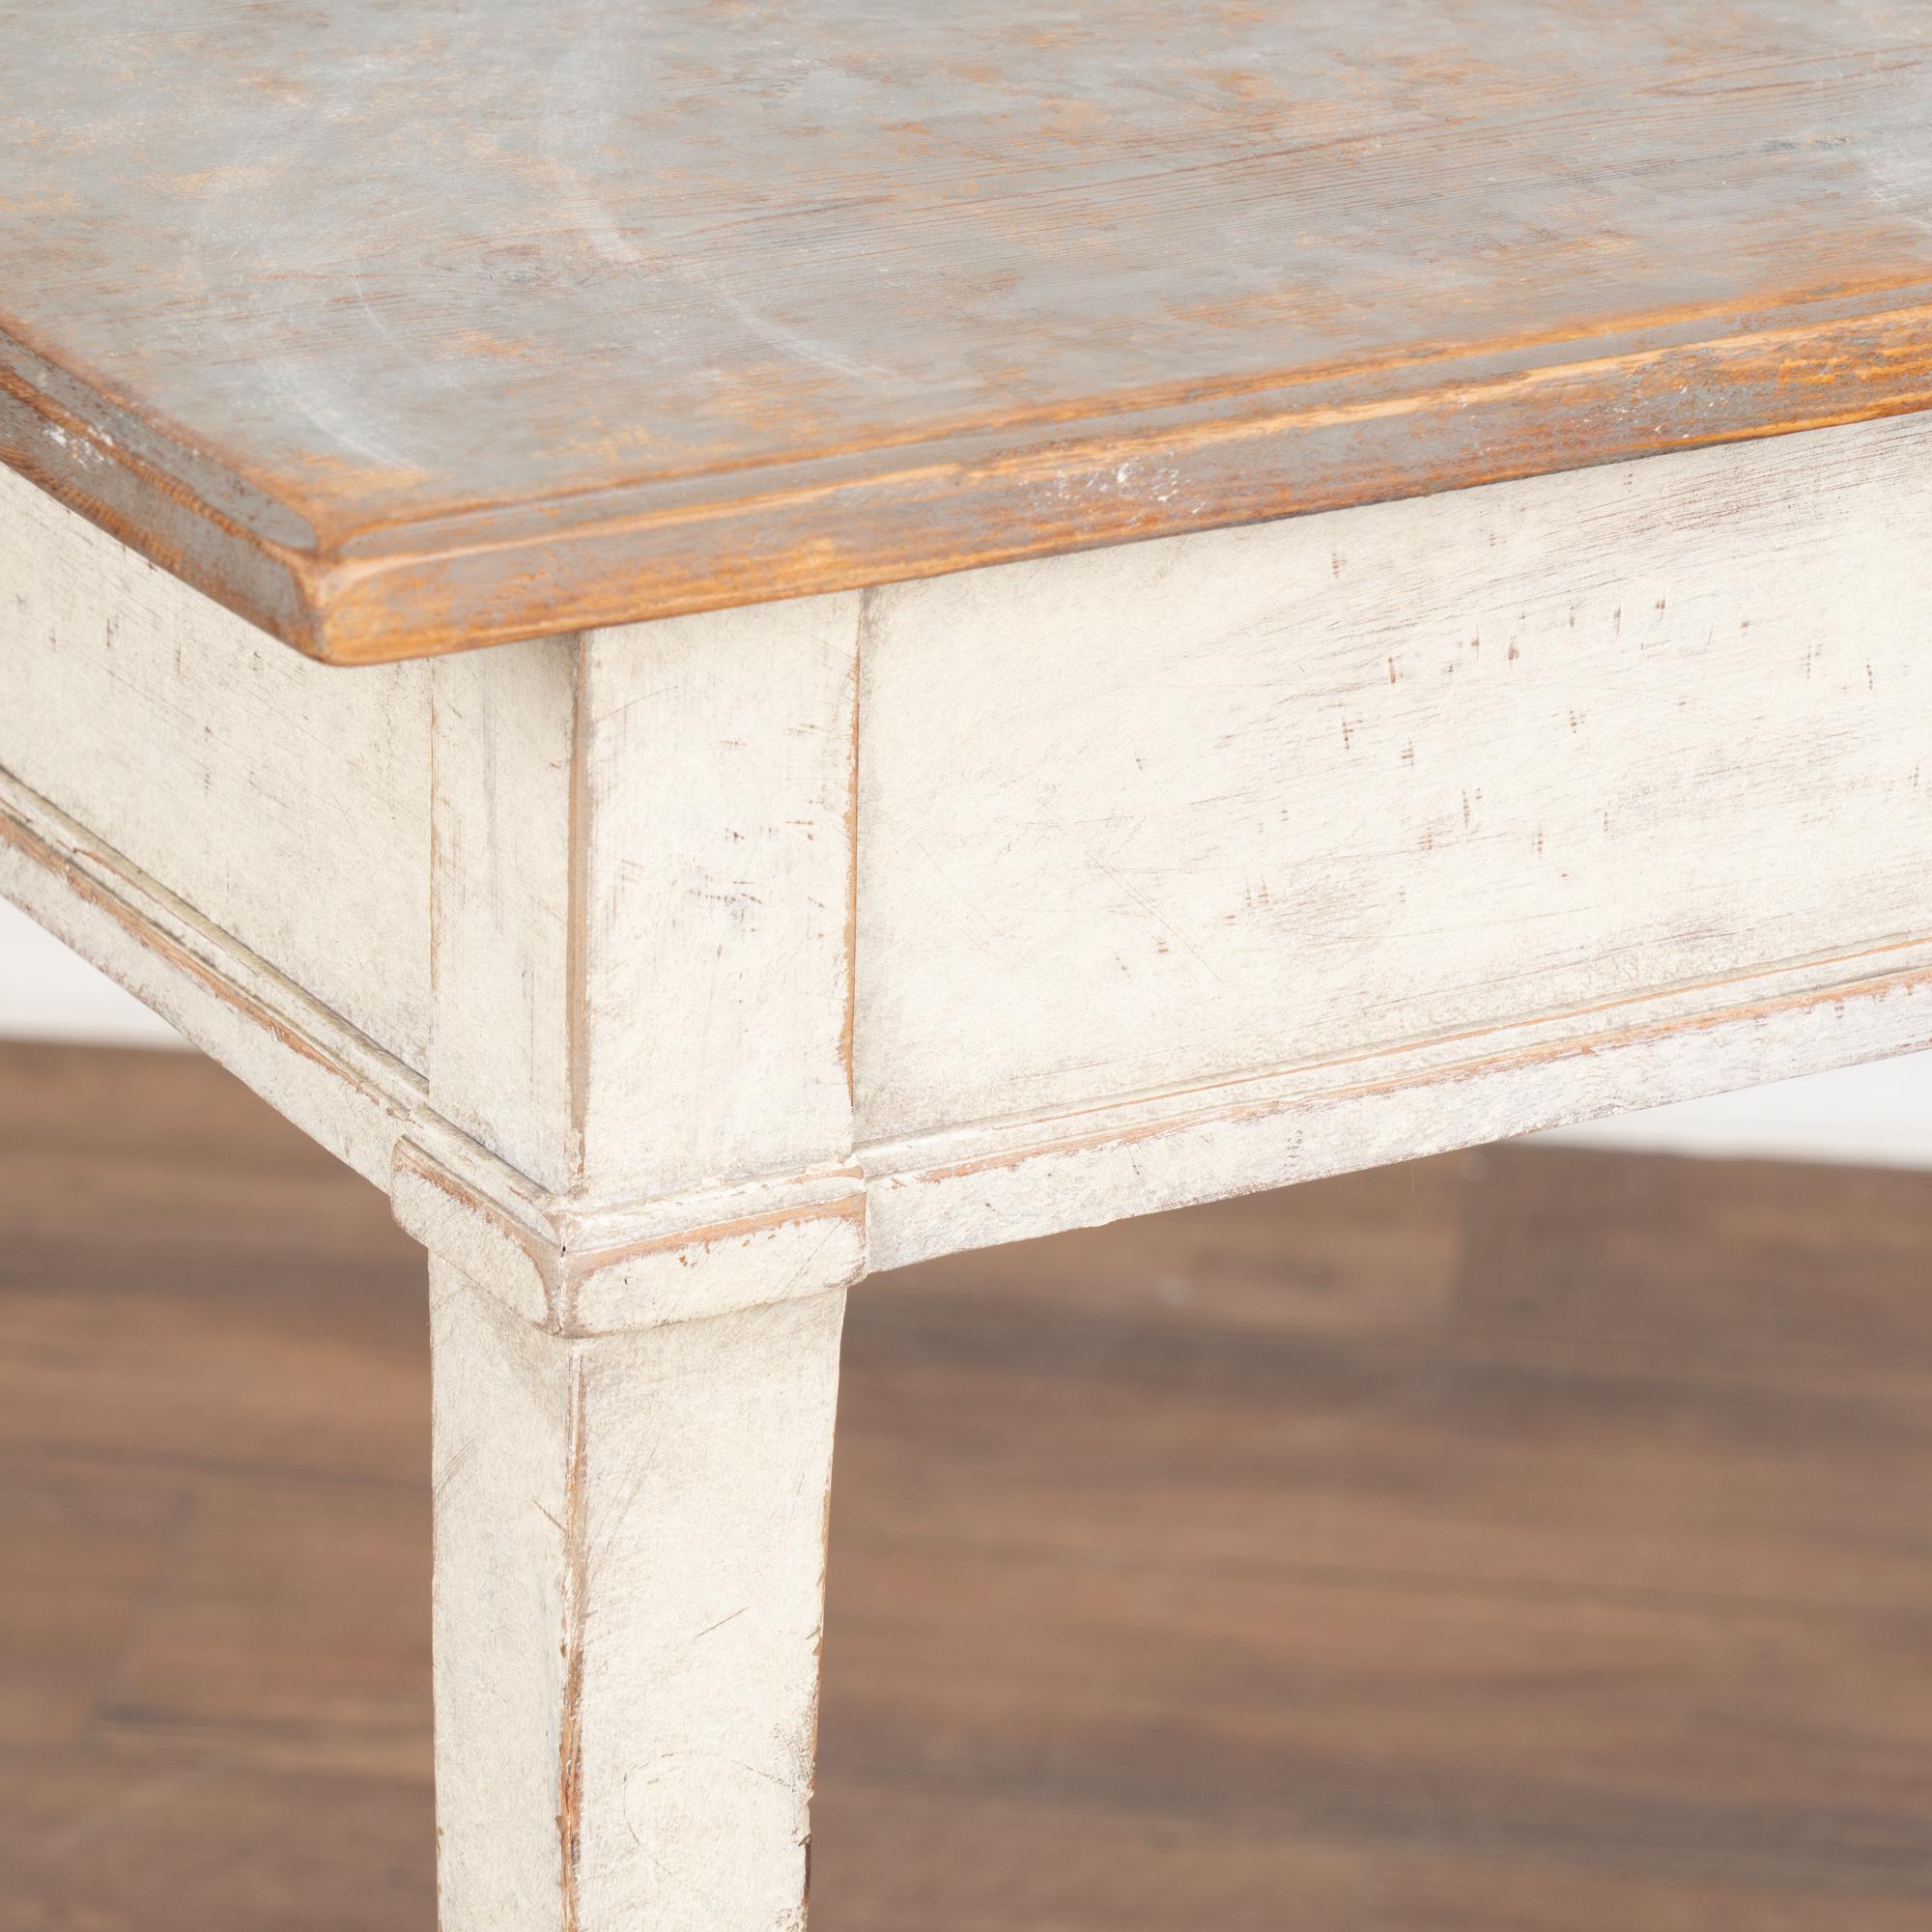 Pair of Gustavian Gray Painted Pine Side Tables, Sweden circa 1890 For Sale 3